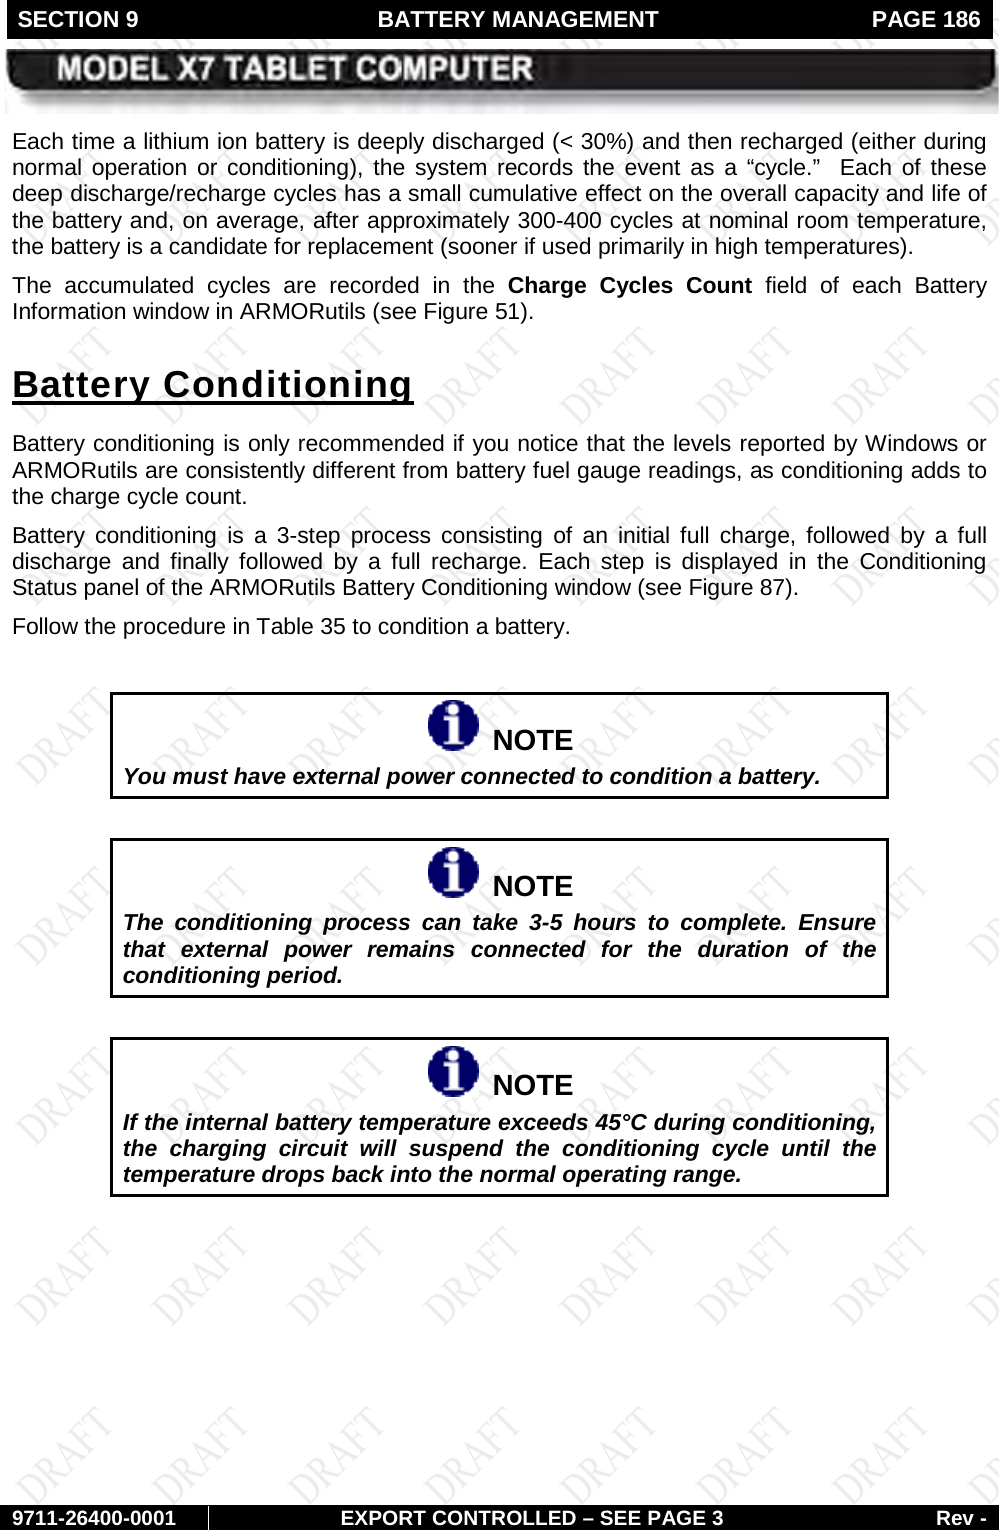 SECTION 9  BATTERY MANAGEMENT  PAGE 186        9711-26400-0001 EXPORT CONTROLLED – SEE PAGE 3 Rev - Each time a lithium ion battery is deeply discharged (&lt; 30%) and then recharged (either during normal operation or conditioning), the system records the event as a “cycle.”  Each of these deep discharge/recharge cycles has a small cumulative effect on the overall capacity and life of the battery and, on average, after approximately 300-400 cycles at nominal room temperature, the battery is a candidate for replacement (sooner if used primarily in high temperatures).  The accumulated cycles are recorded in the Charge Cycles Count field of each Battery Information window in ARMORutils (see Figure 51). Battery conditioning is only recommended if you notice that the levels reported by Windows or ARMORutils are consistently different from battery fuel gauge readings, as conditioning adds to the charge cycle count. Battery Conditioning Battery conditioning is a 3-step process consisting of an initial full charge, followed by a full discharge and finally followed by a full recharge. Each step is displayed in the Conditioning Status panel of the ARMORutils Battery Conditioning window (see Figure 87).  Follow the procedure in Table 35 to condition a battery.    NOTE You must have external power connected to condition a battery.     NOTE The conditioning process can take 3-5 hours to complete. Ensure that  external power remains connected for the duration of the conditioning period.     NOTE If the internal battery temperature exceeds 45°C during conditioning, the charging circuit will suspend the conditioning cycle until the temperature drops back into the normal operating range.       